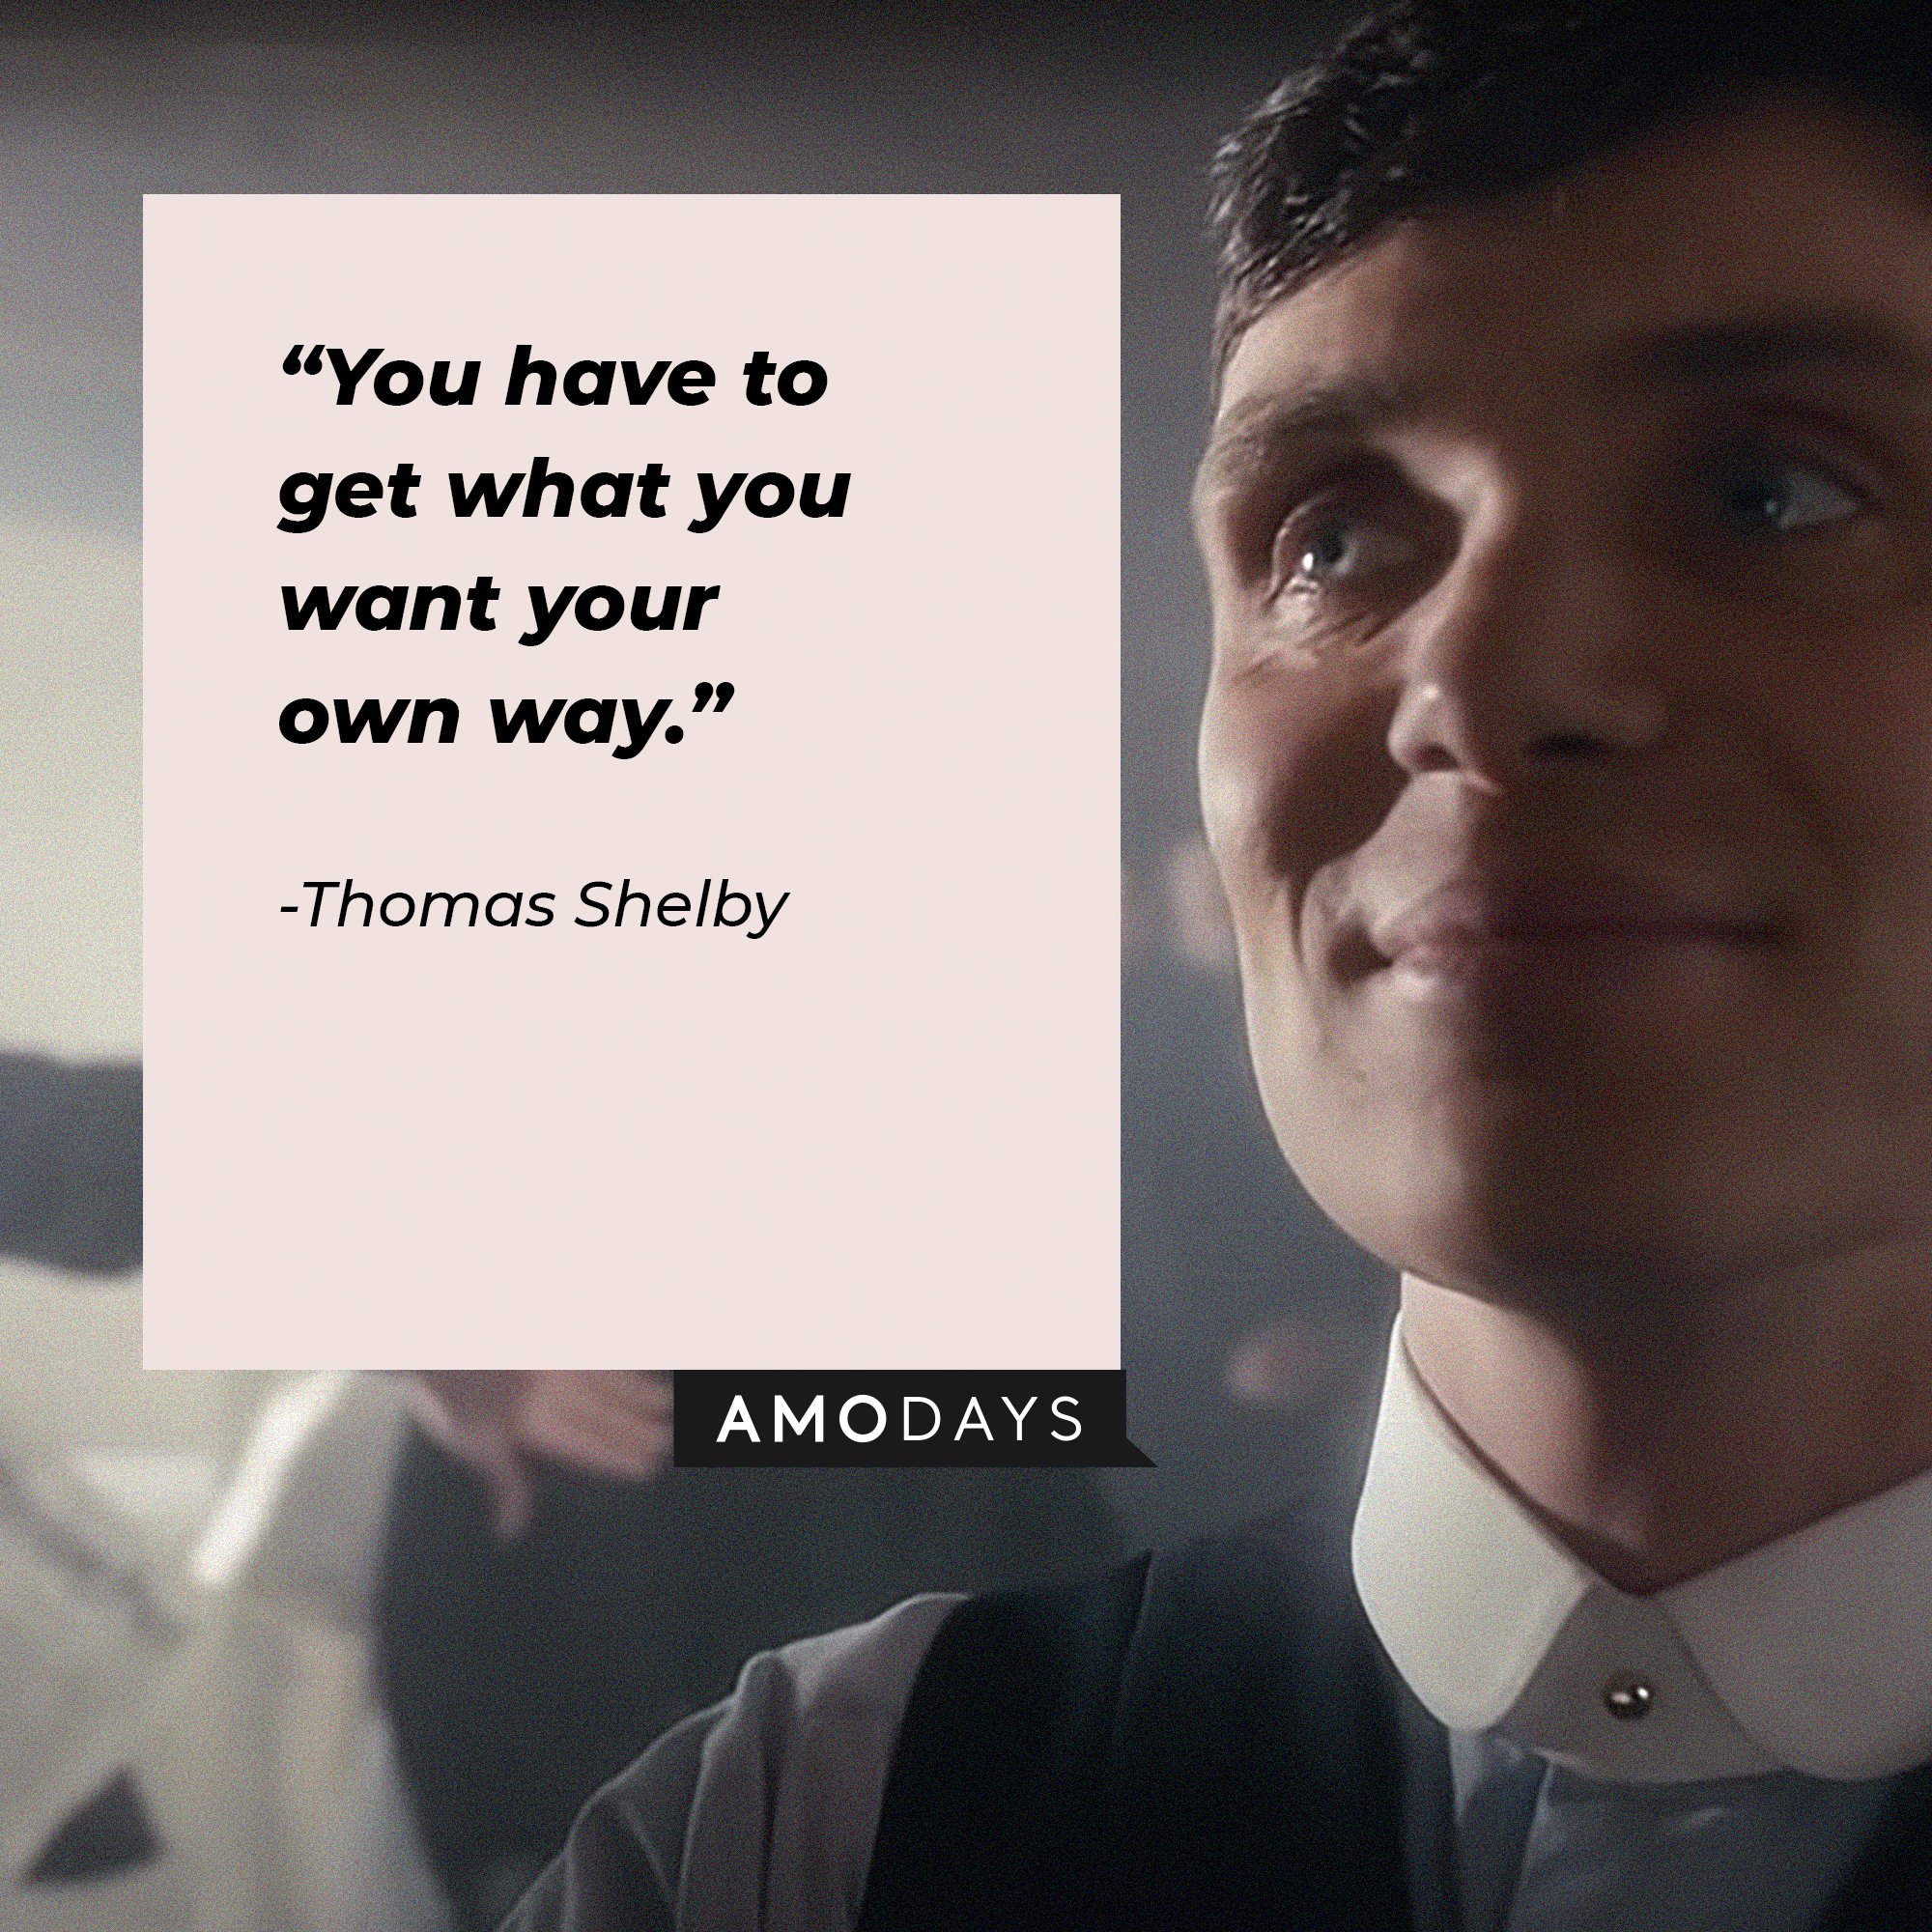 Thomas Shelby's quote: “You have to get what you want your own way.”  | Image: AmoDays